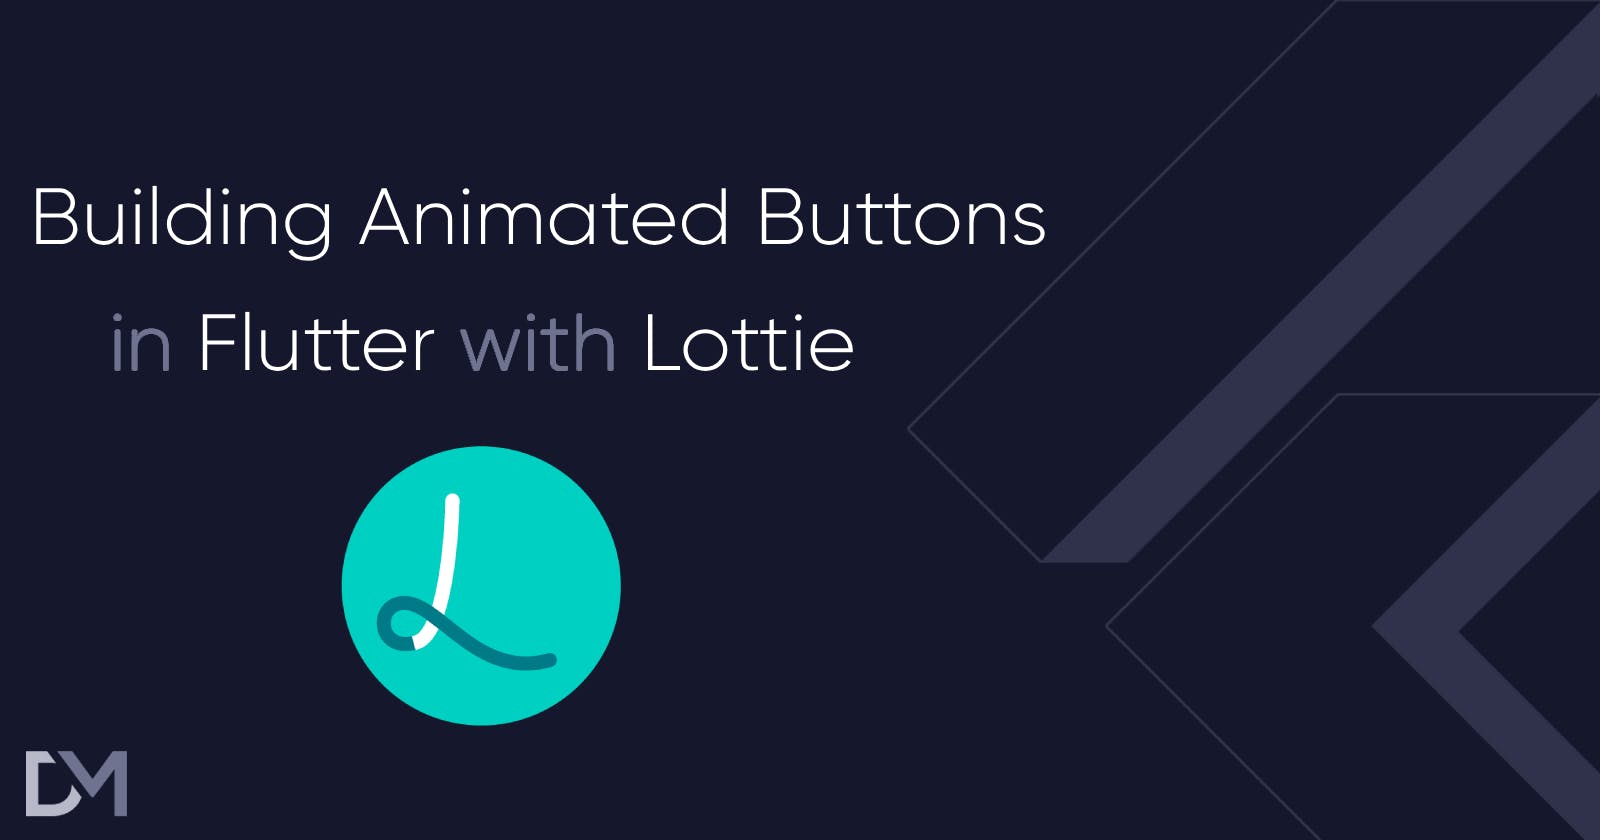 Building Animated Buttons in Flutter with Lottie